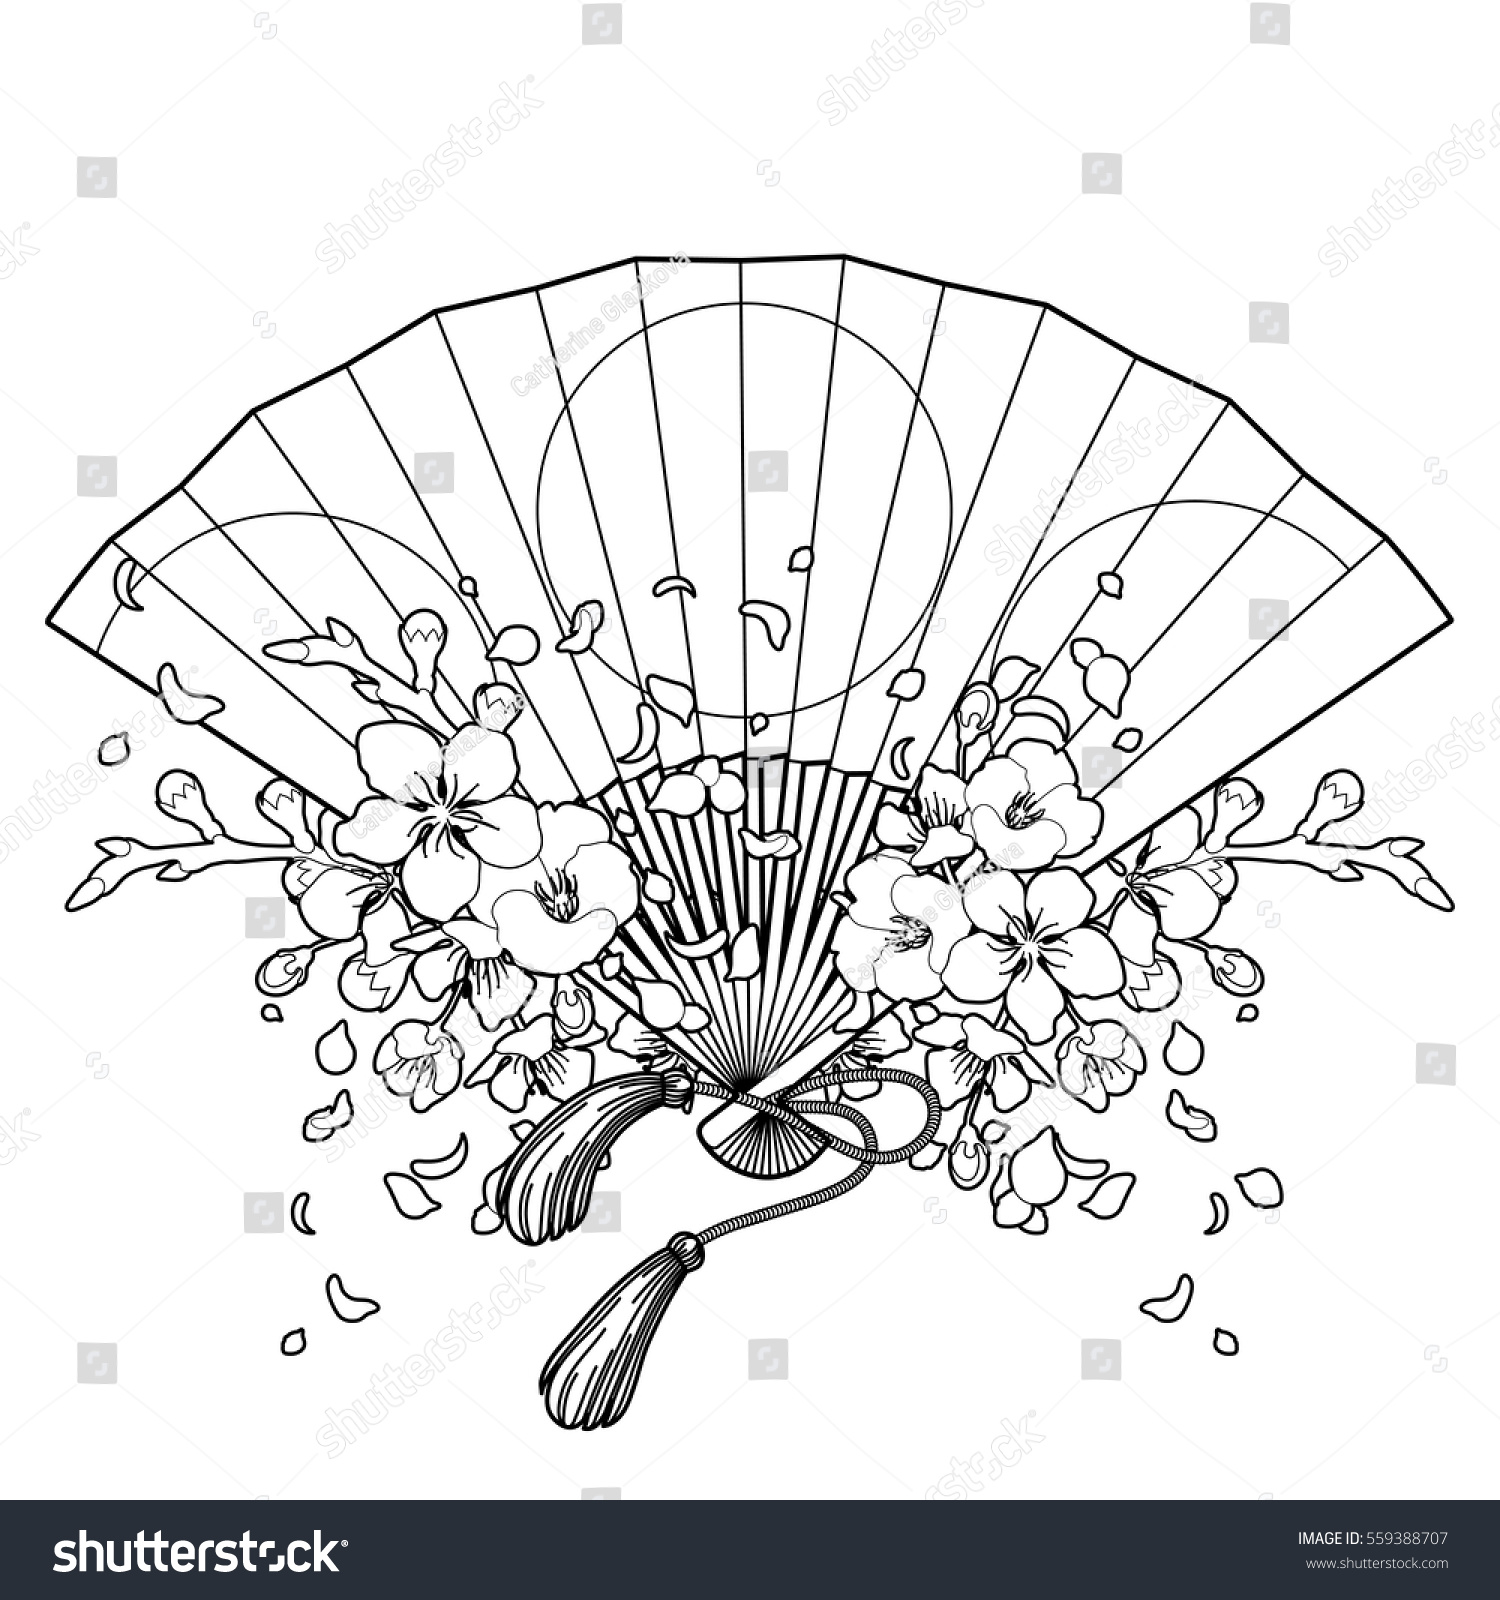 The Basic Types of Hand Fans